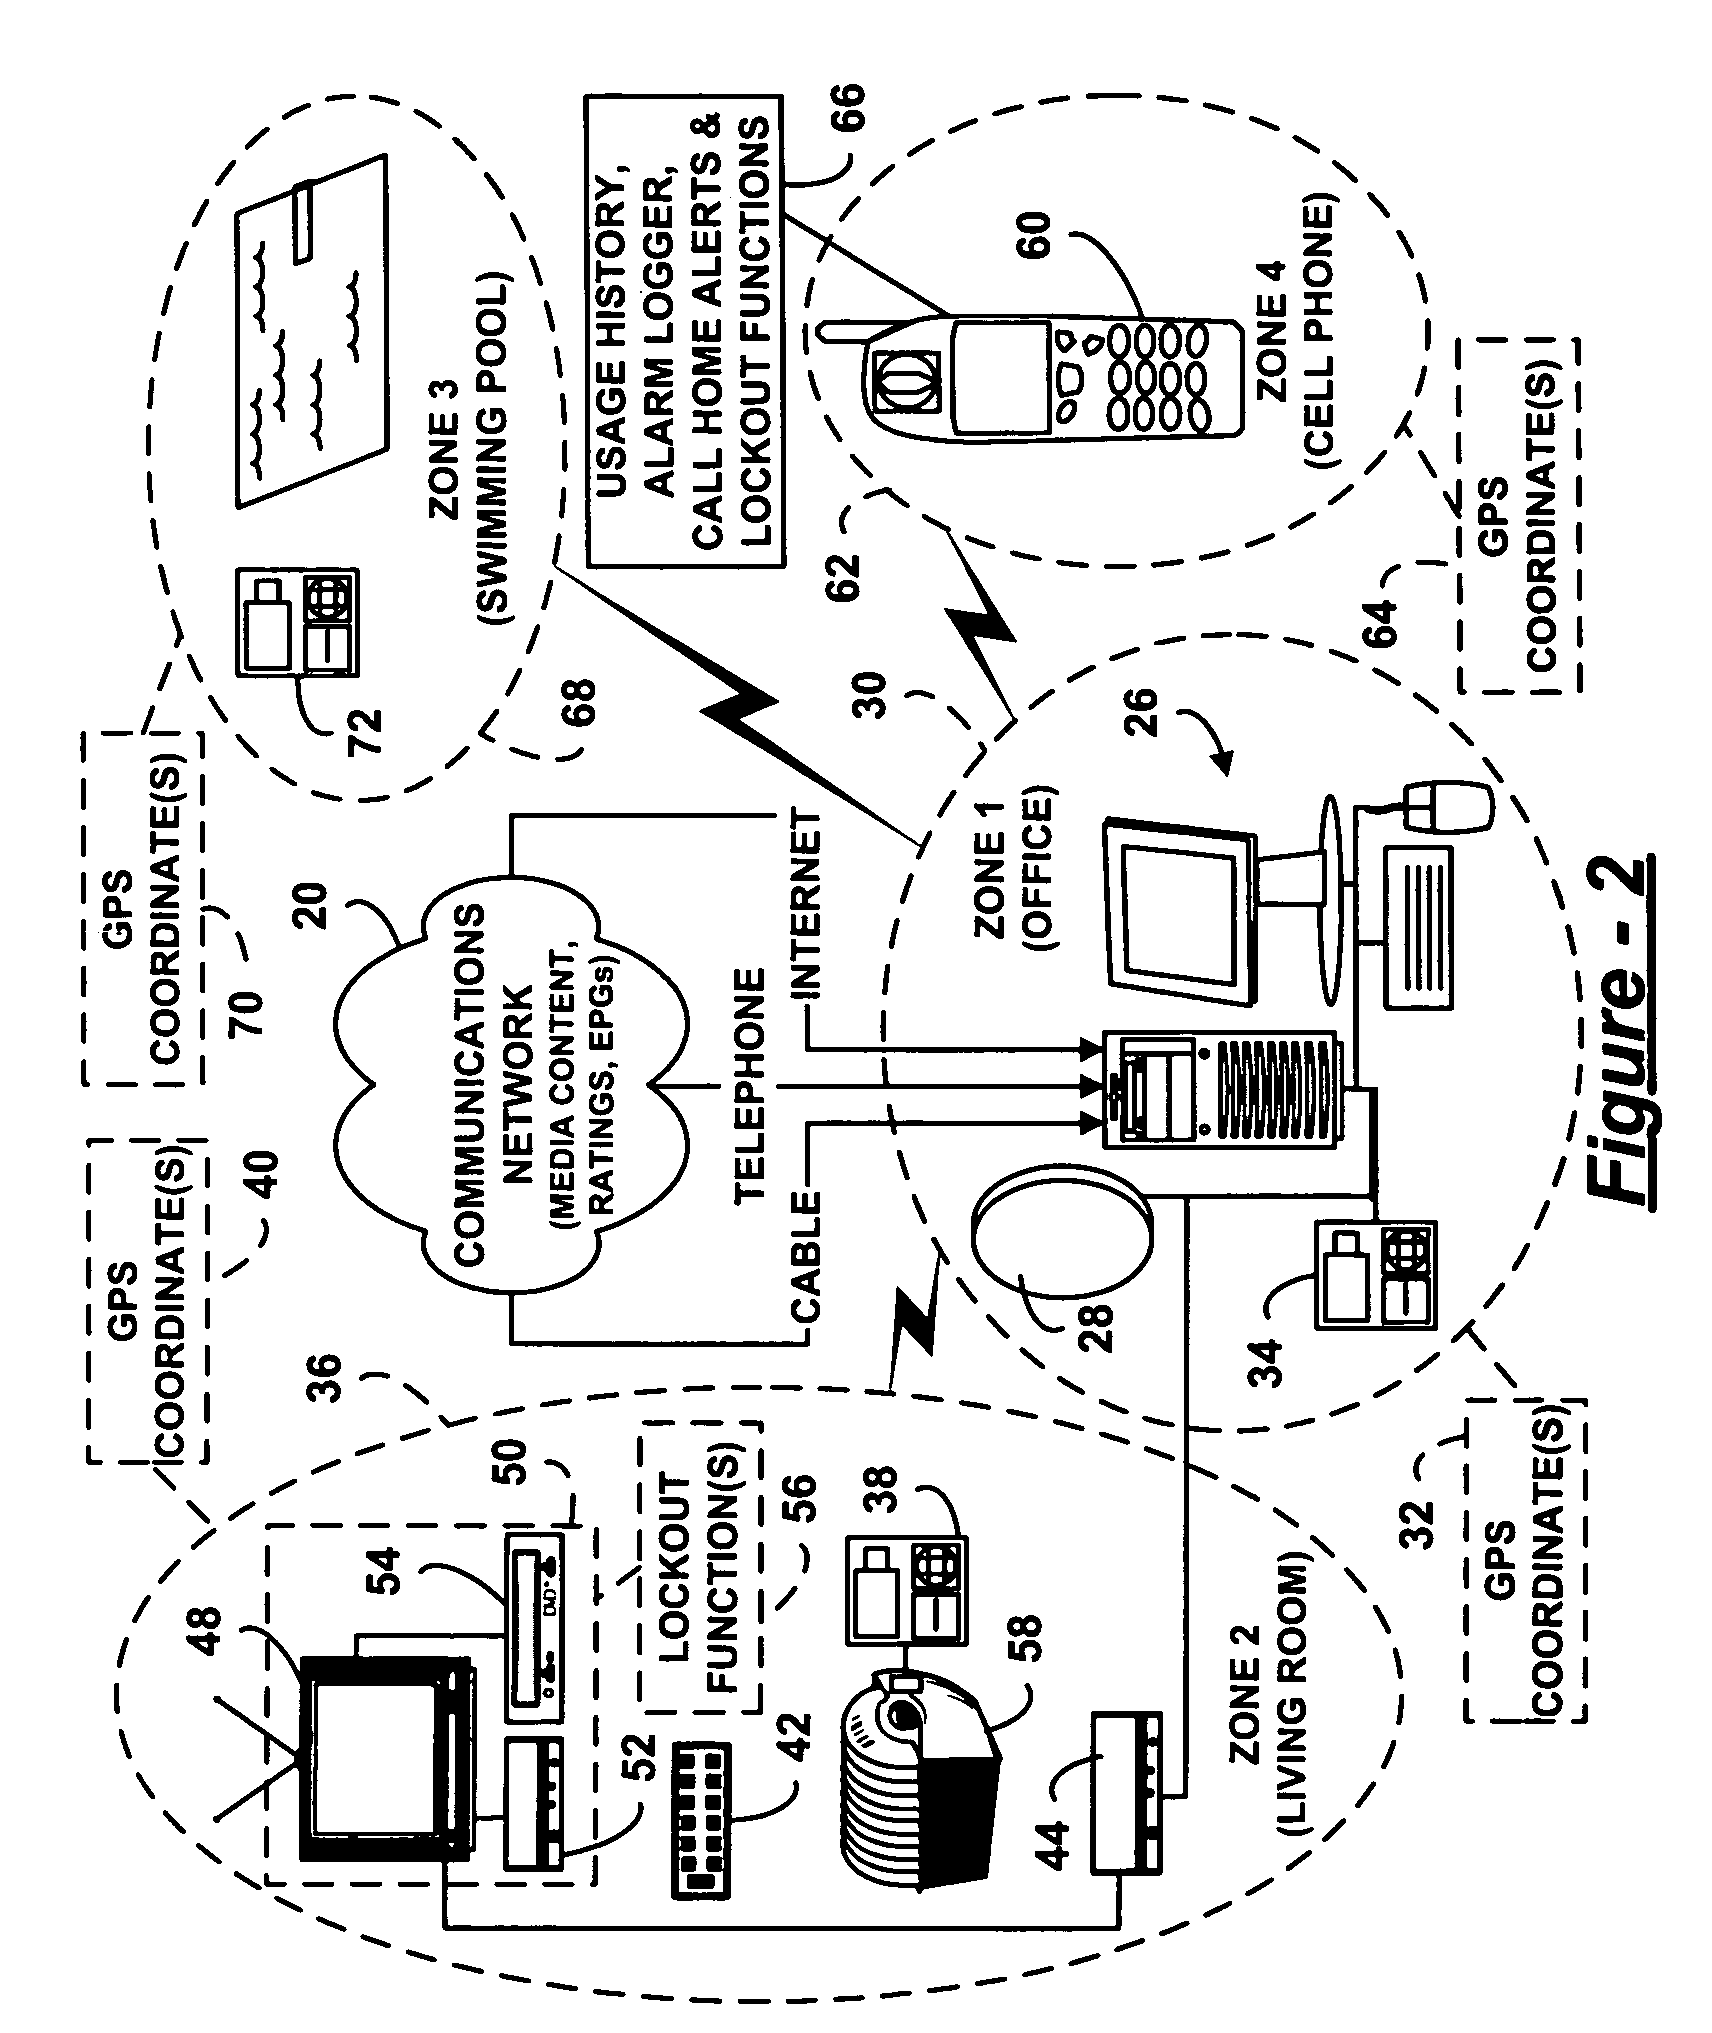 Method and parental control and monitoring of usage of devices connected to home network